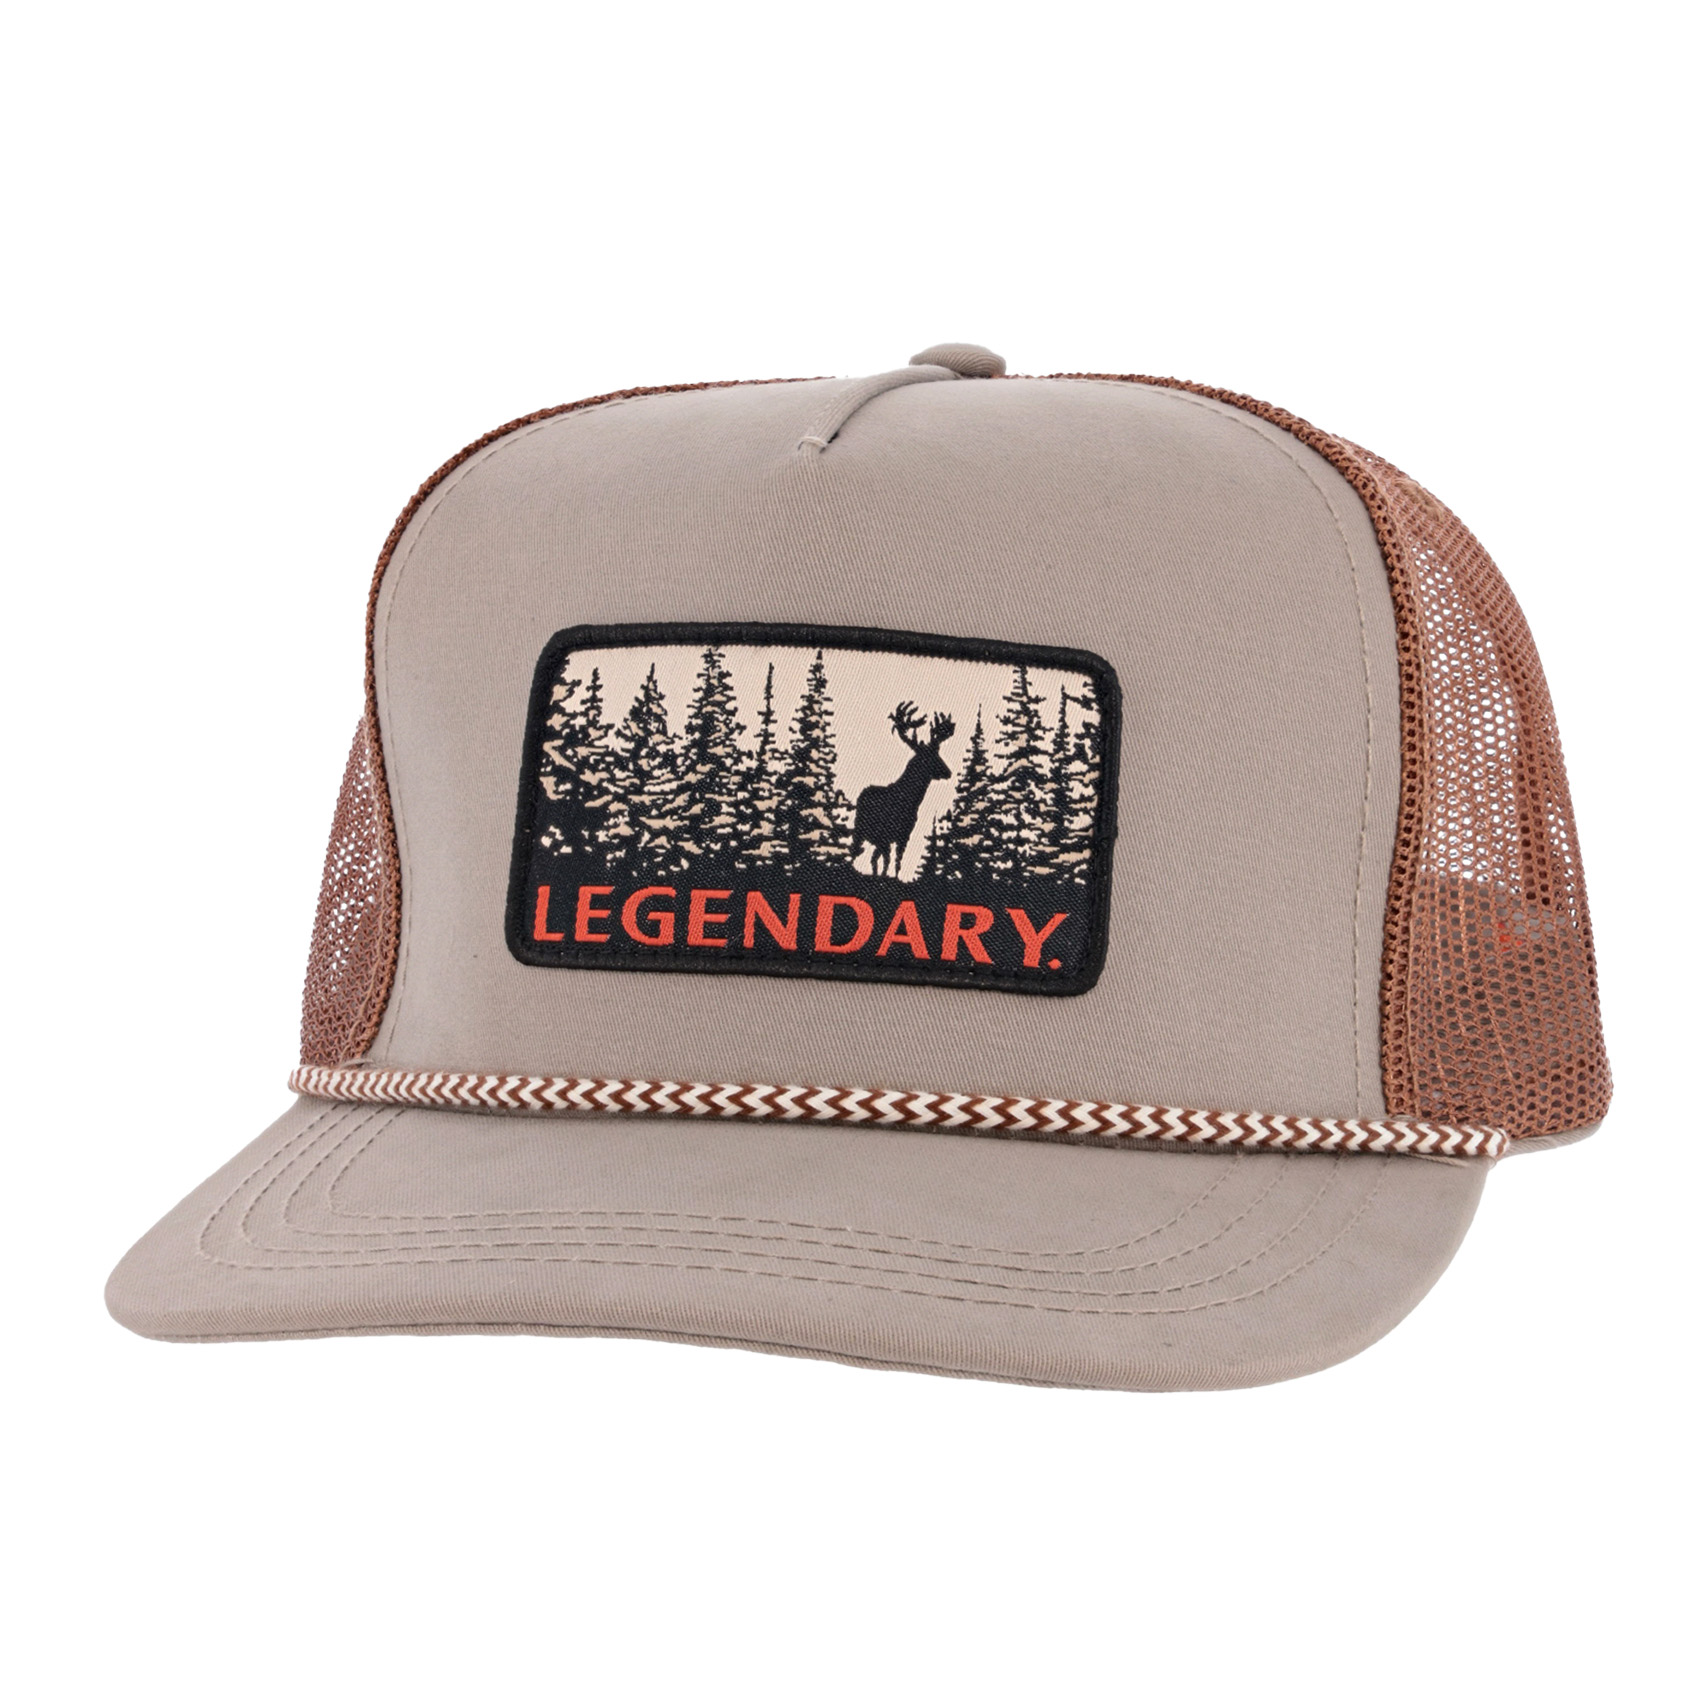 Legendary Whitetails Corded Trucker Hat Grey Cotton Twill/Polyester Mesh